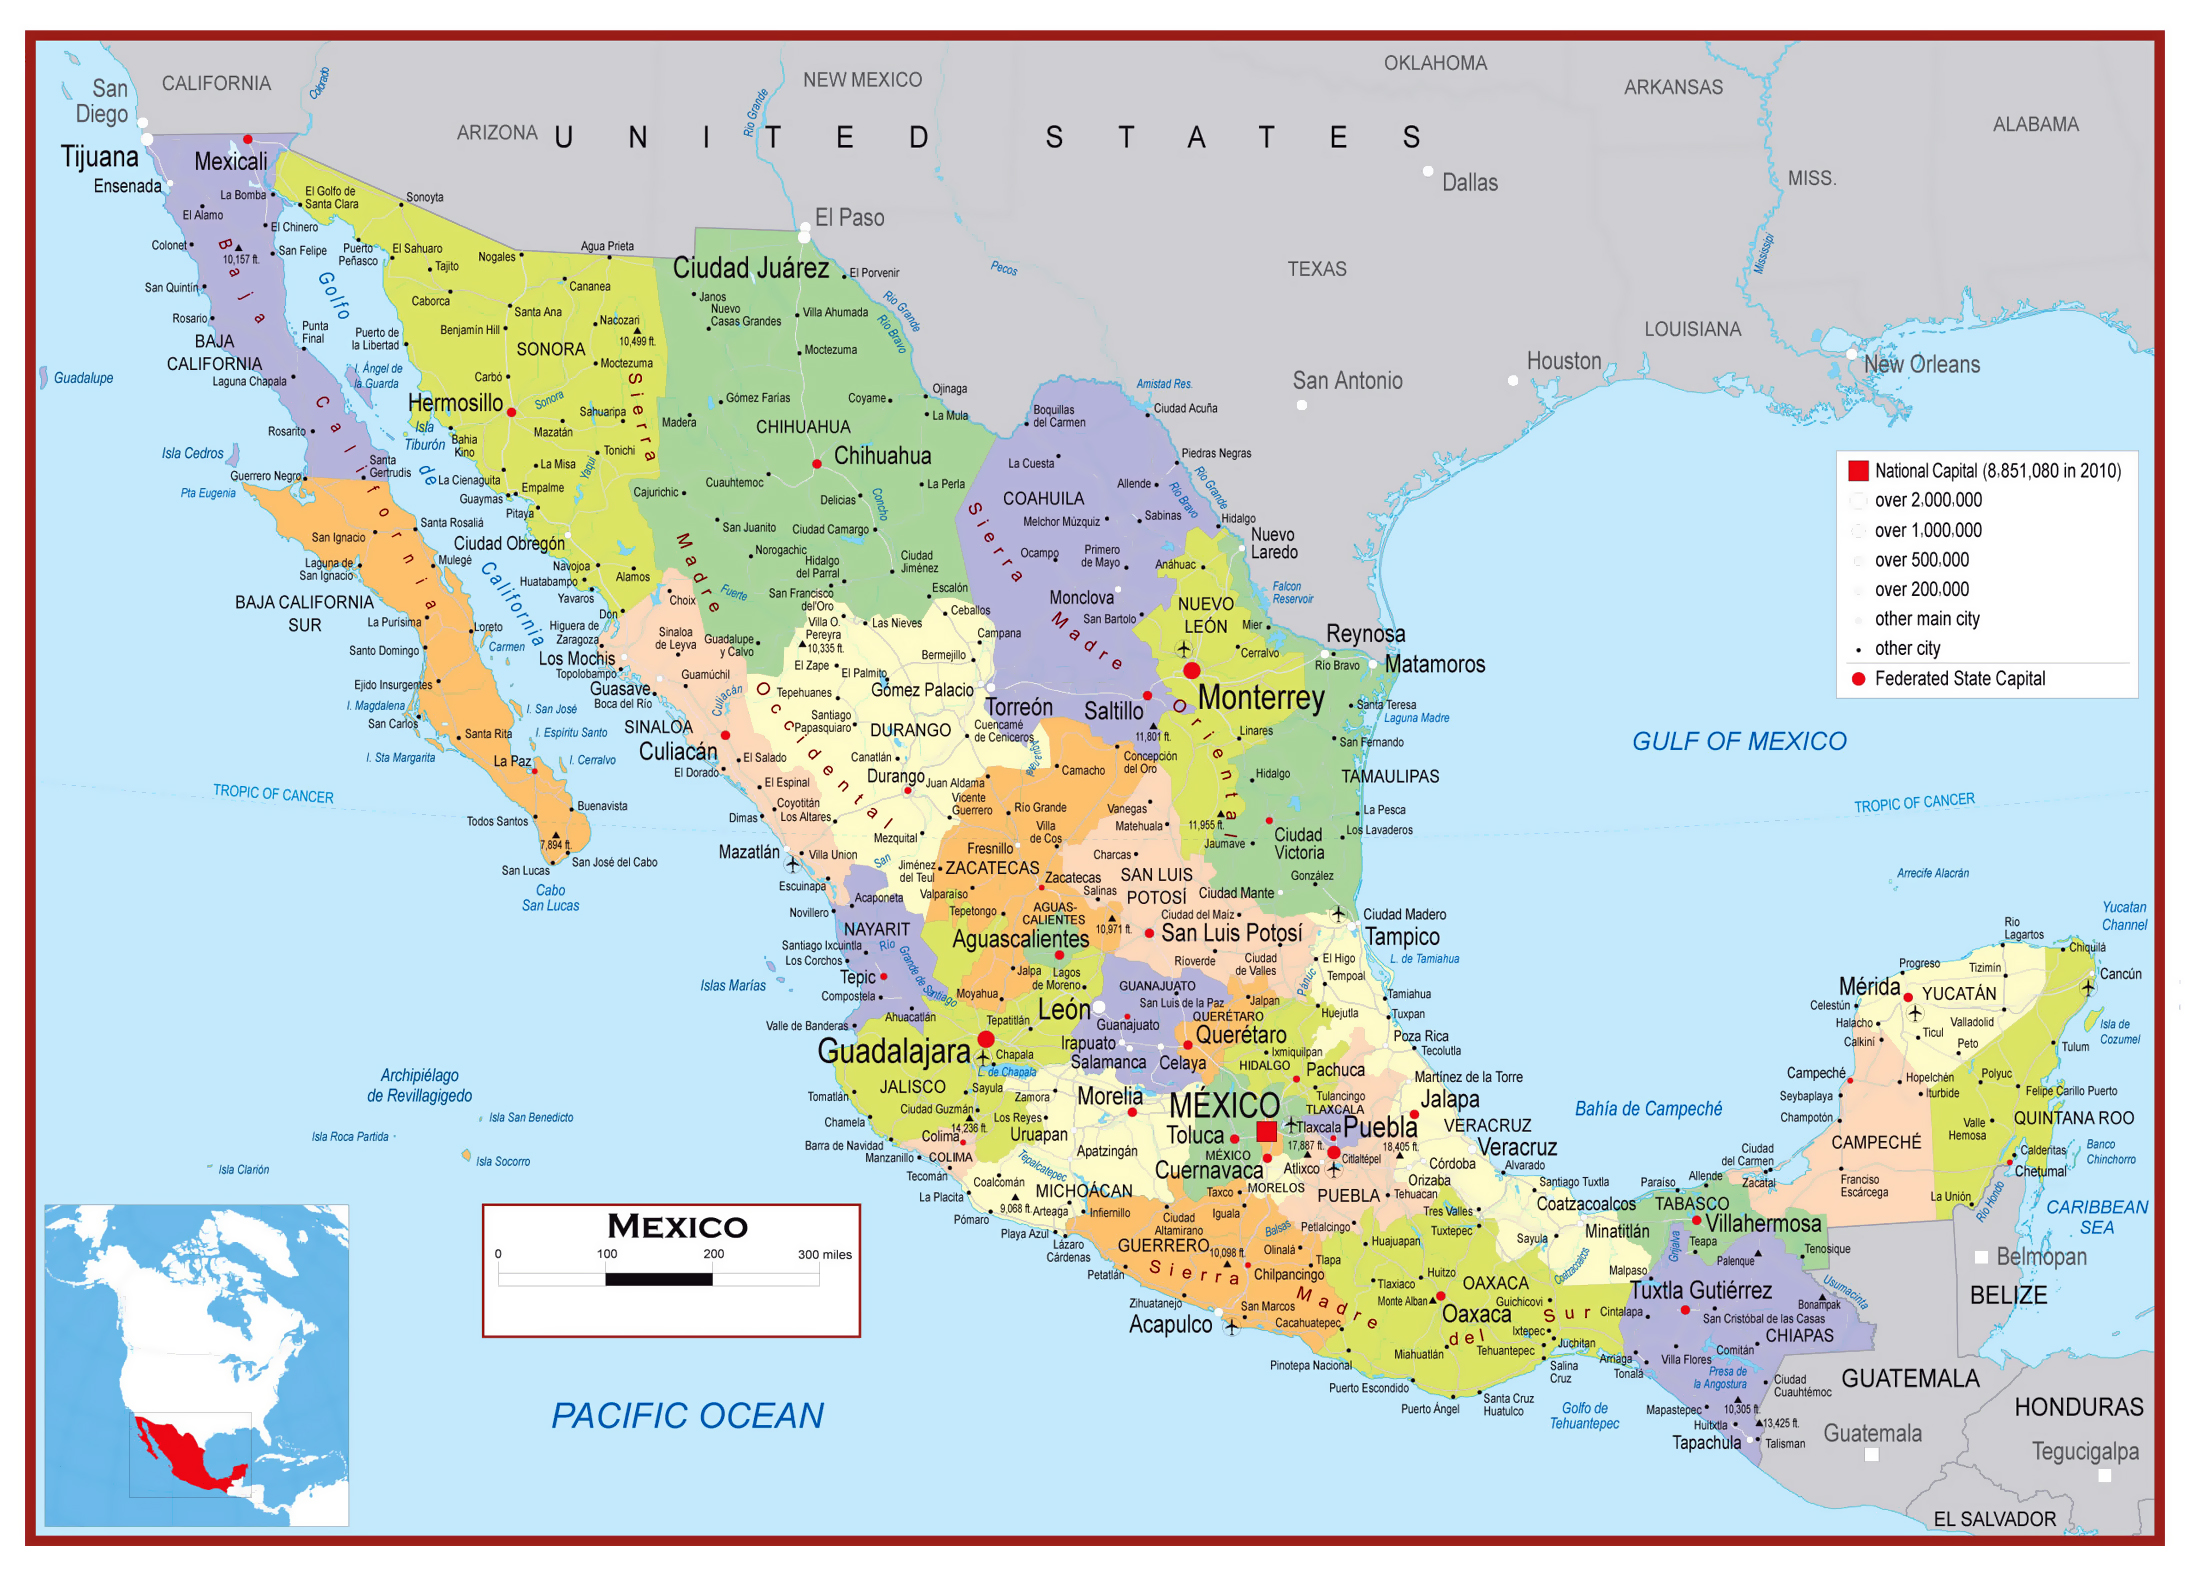 Large Detailed Political And Administrative Map Of Mexico With Roads Cities And Airports 